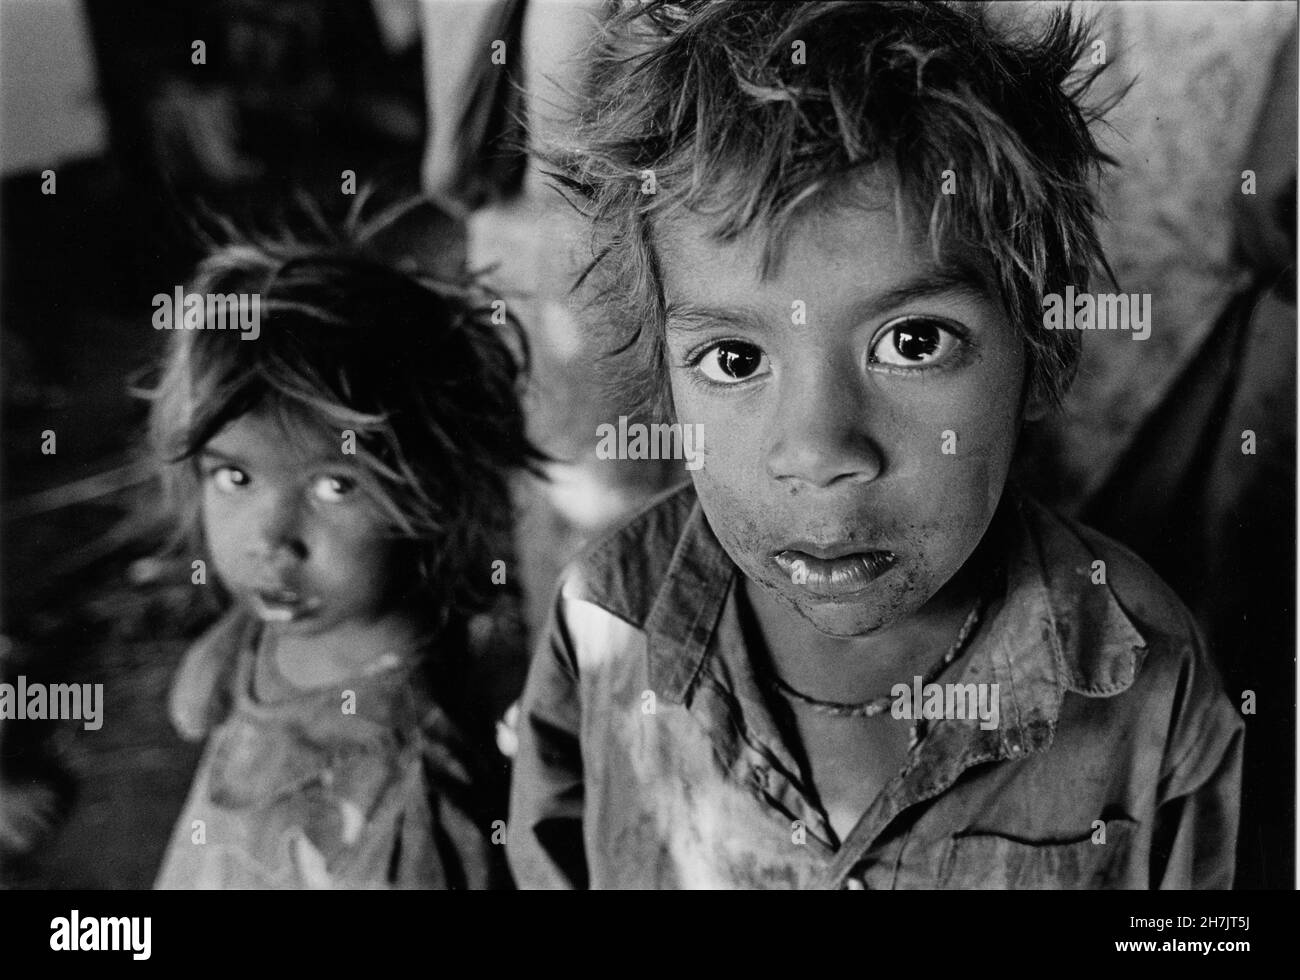 Young nomad children, locally known as Changhar or Jogia Wala, outside their tents at a slum, in Shialkot of Punjab Province, in Pakistan. They are me Stock Photo